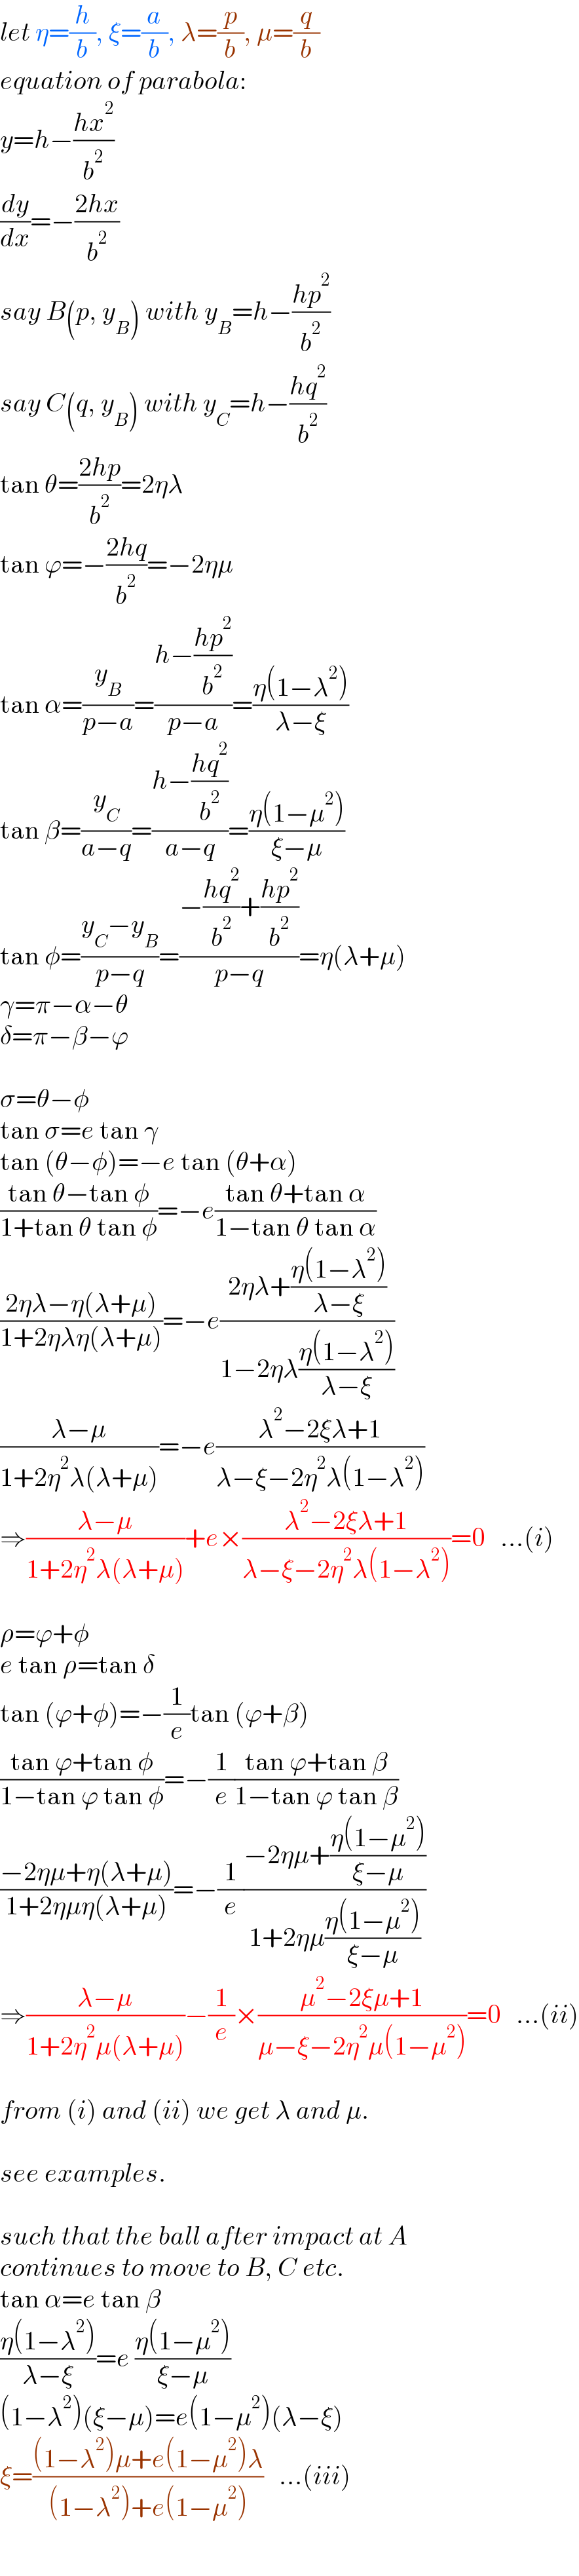 let η=(h/b), ξ=(a/b), λ=(p/b), μ=(q/b)  equation of parabola:  y=h−((hx^2 )/b^2 )  (dy/dx)=−((2hx)/b^2 )  say B(p, y_B ) with y_B =h−((hp^2 )/b^2 )  say C(q, y_B ) with y_C =h−((hq^2 )/b^2 )  tan θ=((2hp)/b^2 )=2ηλ  tan ϕ=−((2hq)/b^2 )=−2ημ  tan α=(y_B /(p−a))=((h−((hp^2 )/b^2 ))/(p−a))=((η(1−λ^2 ))/(λ−ξ))  tan β=(y_C /(a−q))=((h−((hq^2 )/b^2 ))/(a−q))=((η(1−μ^2 ))/(ξ−μ))  tan φ=((y_C −y_B )/(p−q))=((−((hq^2 )/b^2 )+((hp^2 )/b^2 ))/(p−q))=η(λ+μ)  γ=π−α−θ  δ=π−β−ϕ    σ=θ−φ  tan σ=e tan γ  tan (θ−φ)=−e tan (θ+α)  ((tan θ−tan φ)/(1+tan θ tan φ))=−e((tan θ+tan α)/(1−tan θ tan α))  ((2ηλ−η(λ+μ))/(1+2ηλη(λ+μ)))=−e((2ηλ+((η(1−λ^2 ))/(λ−ξ)))/(1−2ηλ((η(1−λ^2 ))/(λ−ξ))))  ((λ−μ)/(1+2η^2 λ(λ+μ)))=−e((λ^2 −2ξλ+1)/(λ−ξ−2η^2 λ(1−λ^2 )))  ⇒((λ−μ)/(1+2η^2 λ(λ+μ)))+e×((λ^2 −2ξλ+1)/(λ−ξ−2η^2 λ(1−λ^2 )))=0   ...(i)    ρ=ϕ+φ  e tan ρ=tan δ  tan (ϕ+φ)=−(1/e)tan (ϕ+β)  ((tan ϕ+tan φ)/(1−tan ϕ tan φ))=−(1/e)((tan ϕ+tan β)/(1−tan ϕ tan β))  ((−2ημ+η(λ+μ))/(1+2ημη(λ+μ)))=−(1/e)((−2ημ+((η(1−μ^2 ))/(ξ−μ)))/(1+2ημ((η(1−μ^2 ))/(ξ−μ))))  ⇒((λ−μ)/(1+2η^2 μ(λ+μ)))−(1/e)×((μ^2 −2ξμ+1)/(μ−ξ−2η^2 μ(1−μ^2 )))=0   ...(ii)    from (i) and (ii) we get λ and μ.    see examples.    such that the ball after impact at A  continues to move to B, C etc.  tan α=e tan β  ((η(1−λ^2 ))/(λ−ξ))=e ((η(1−μ^2 ))/(ξ−μ))  (1−λ^2 )(ξ−μ)=e(1−μ^2 )(λ−ξ)  ξ=(((1−λ^2 )μ+e(1−μ^2 )λ)/((1−λ^2 )+e(1−μ^2 )))   ...(iii)  